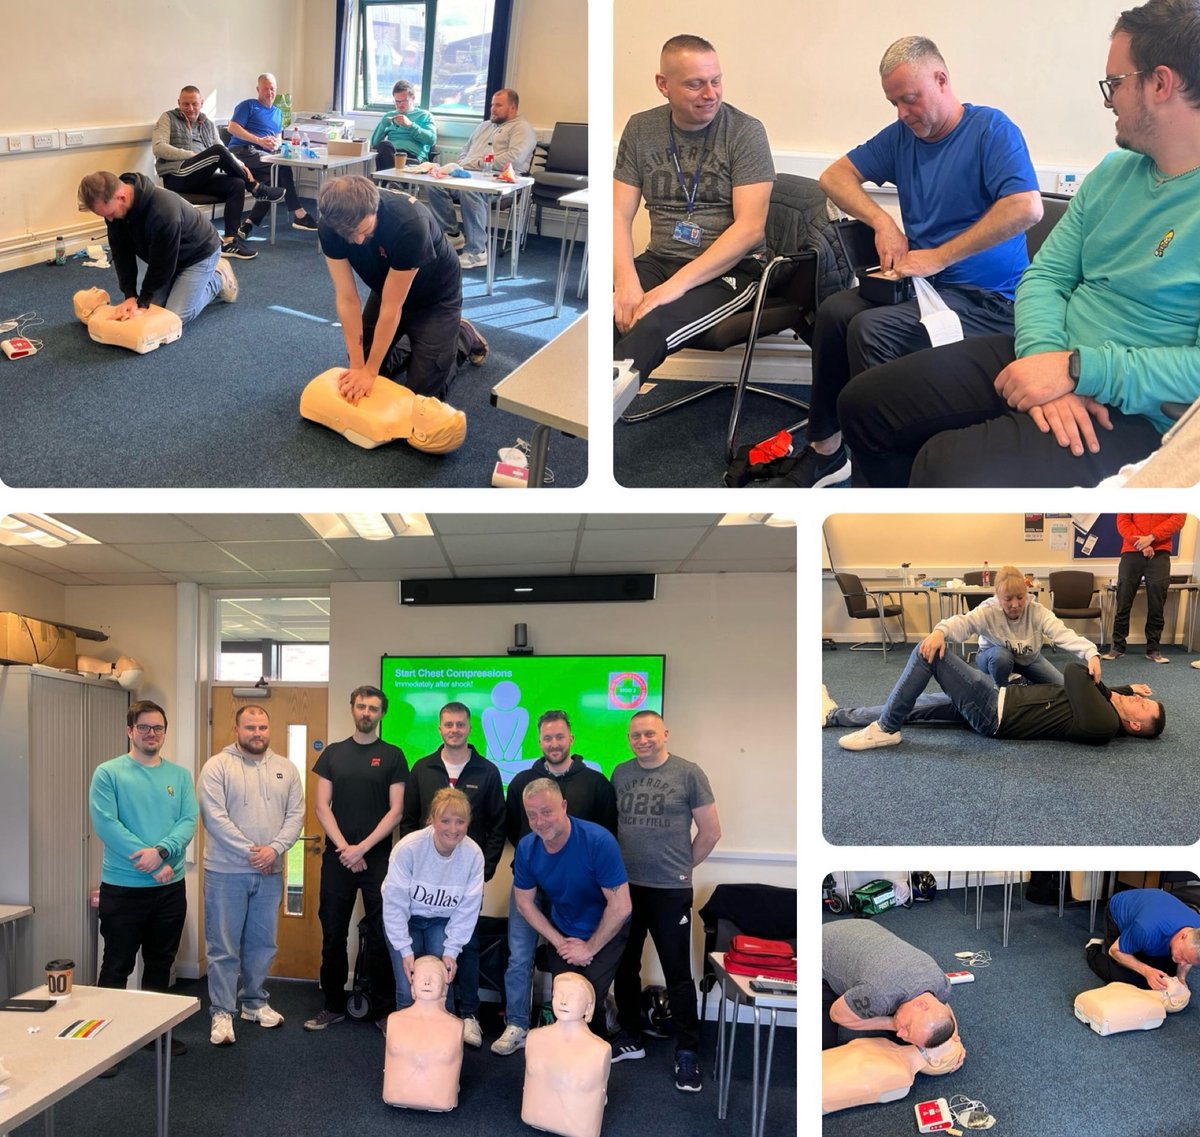 Today 8 of our SC’s attended annual mandatory First Aid training refresher at HQ. #FirstAid